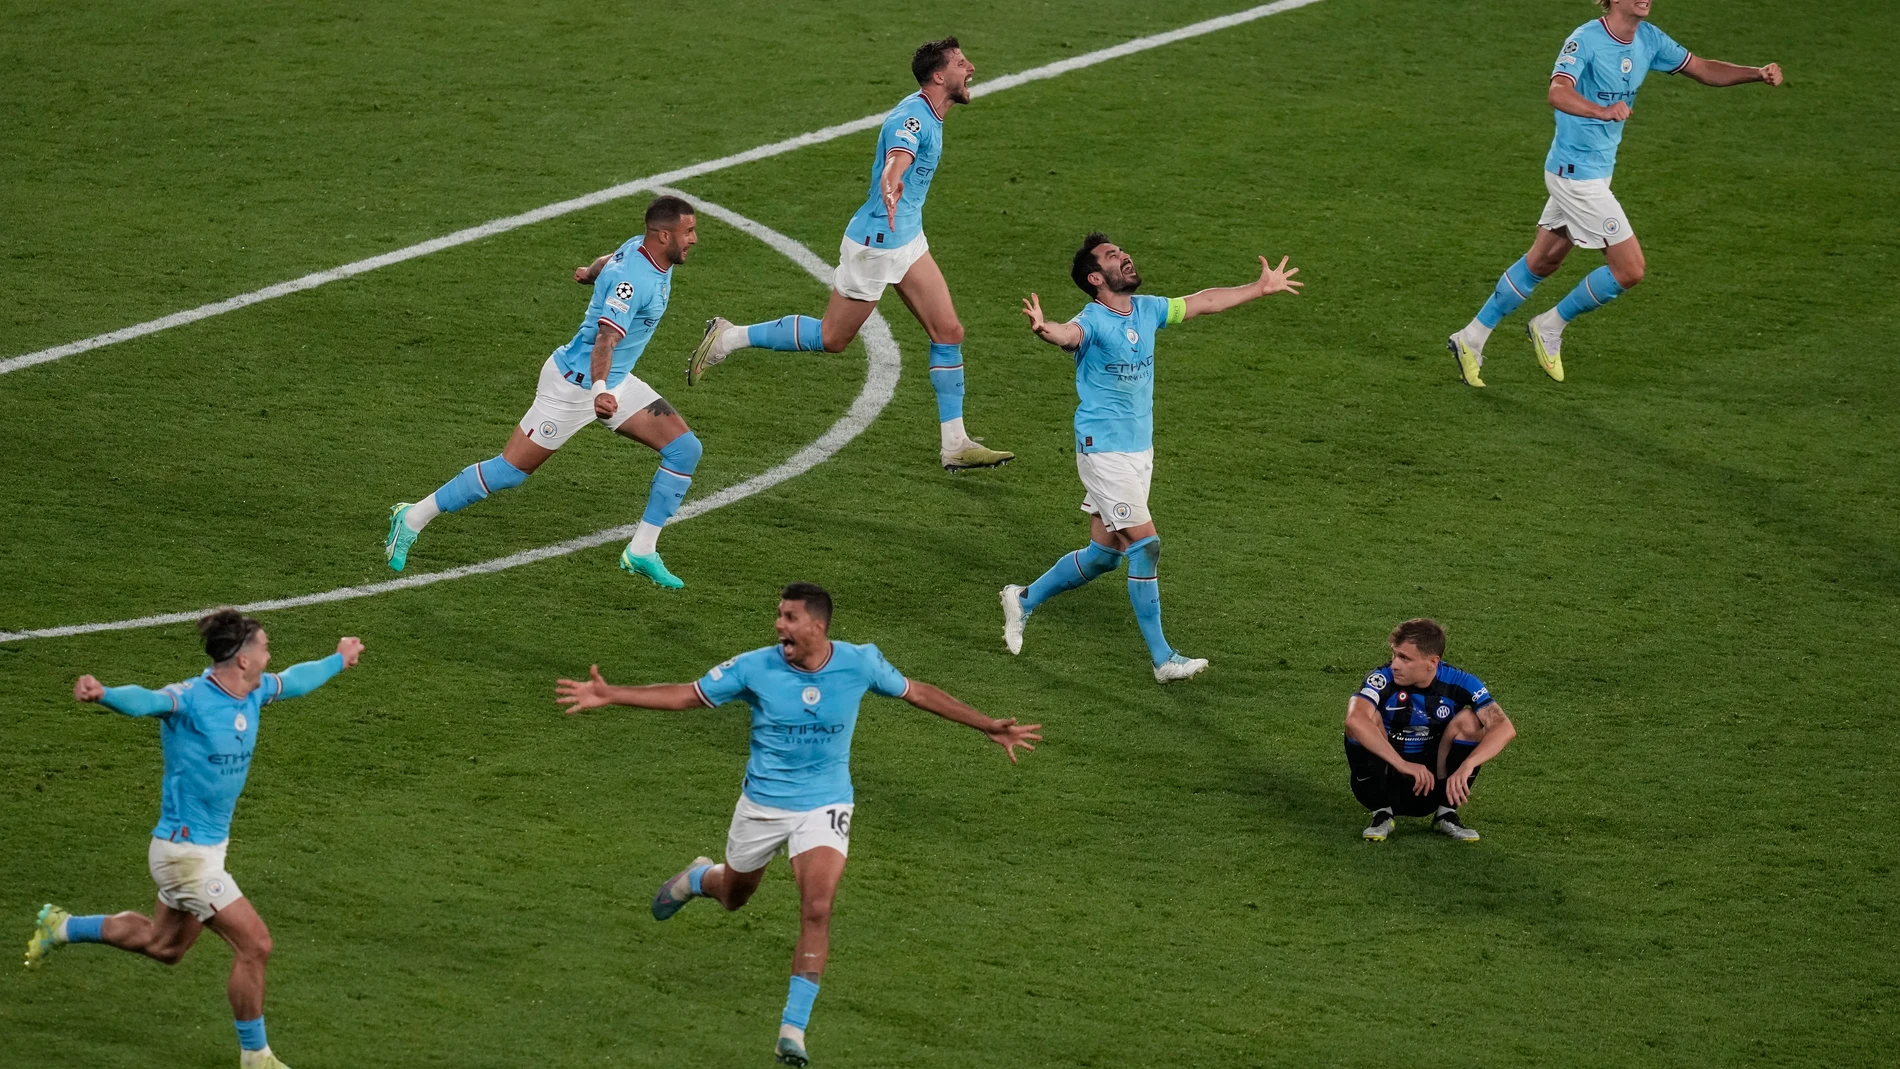 Manchester City players celebrate their 1-0 win at the end of the Champions League final soccer match between Manchester City and Inter Milan at the Ataturk Olympic Stadium in Istanbul, Turkey, Saturday, June 10, 2023. (AP Photo/Thanassis Stavrakis)